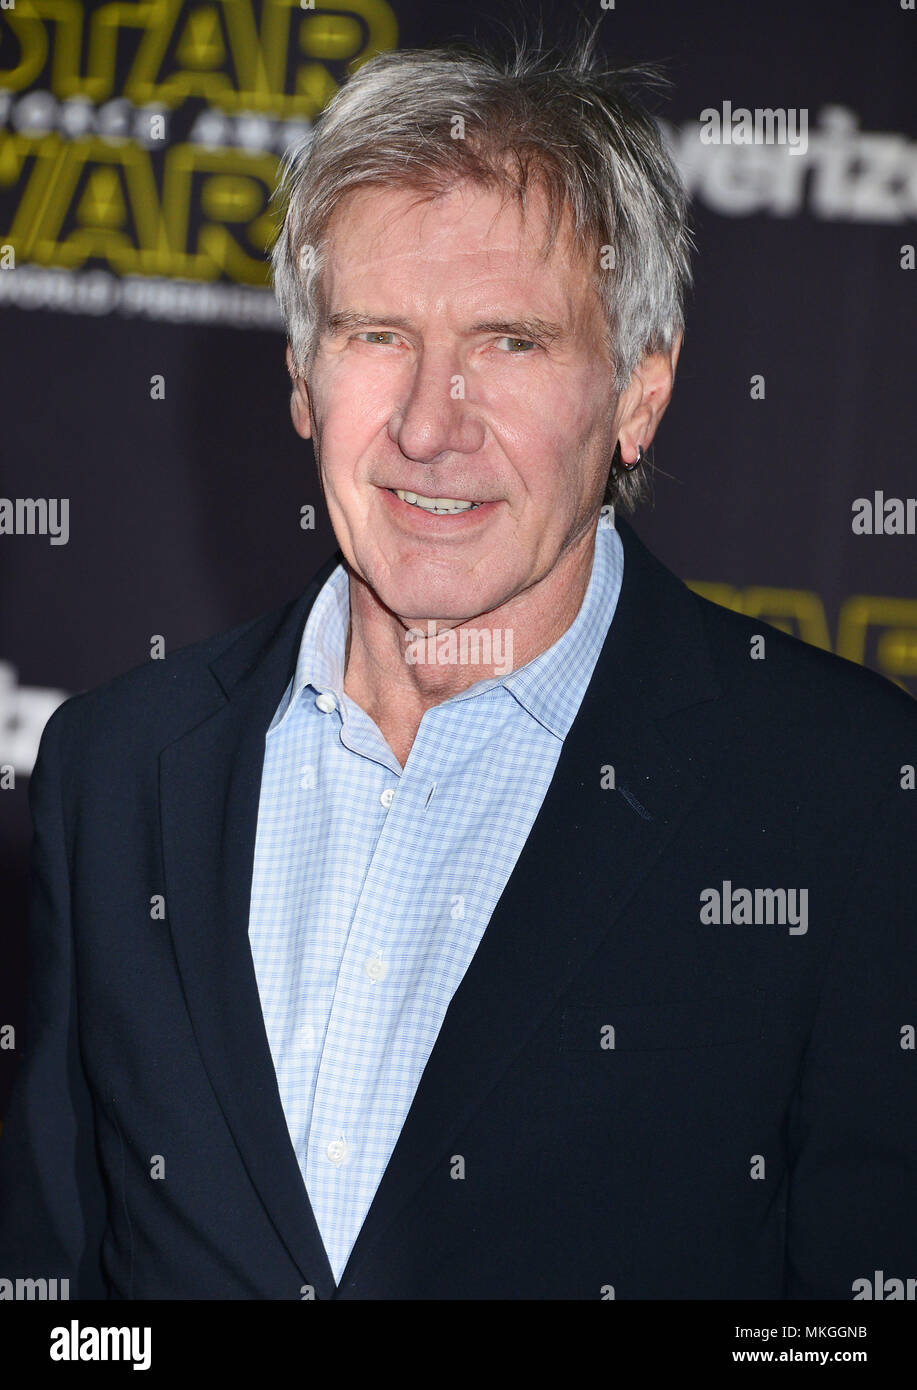 Harrison Ford    at the Star Wars The Force Awakens Premiere at the Dolby Theatre, TCL Chinese Theatre and El Capitan Theatre on December 14, 2015 in Hollywood, Harrison Ford     Event in Hollywood Life - California,  Red Carpet Event, Vertical, USA, Film Industry, Celebrities,  Photography, Bestof, Arts Culture and Entertainment, Topix Celebrities fashion / one person, Vertical, Best of, Hollywood Life, Event in Hollywood Life - California,  Red Carpet and backstage, USA, Film Industry, Celebrities,  movie celebrities, TV celebrities, Music celebrities, Photography, Bestof, Arts Culture and E Stock Photo